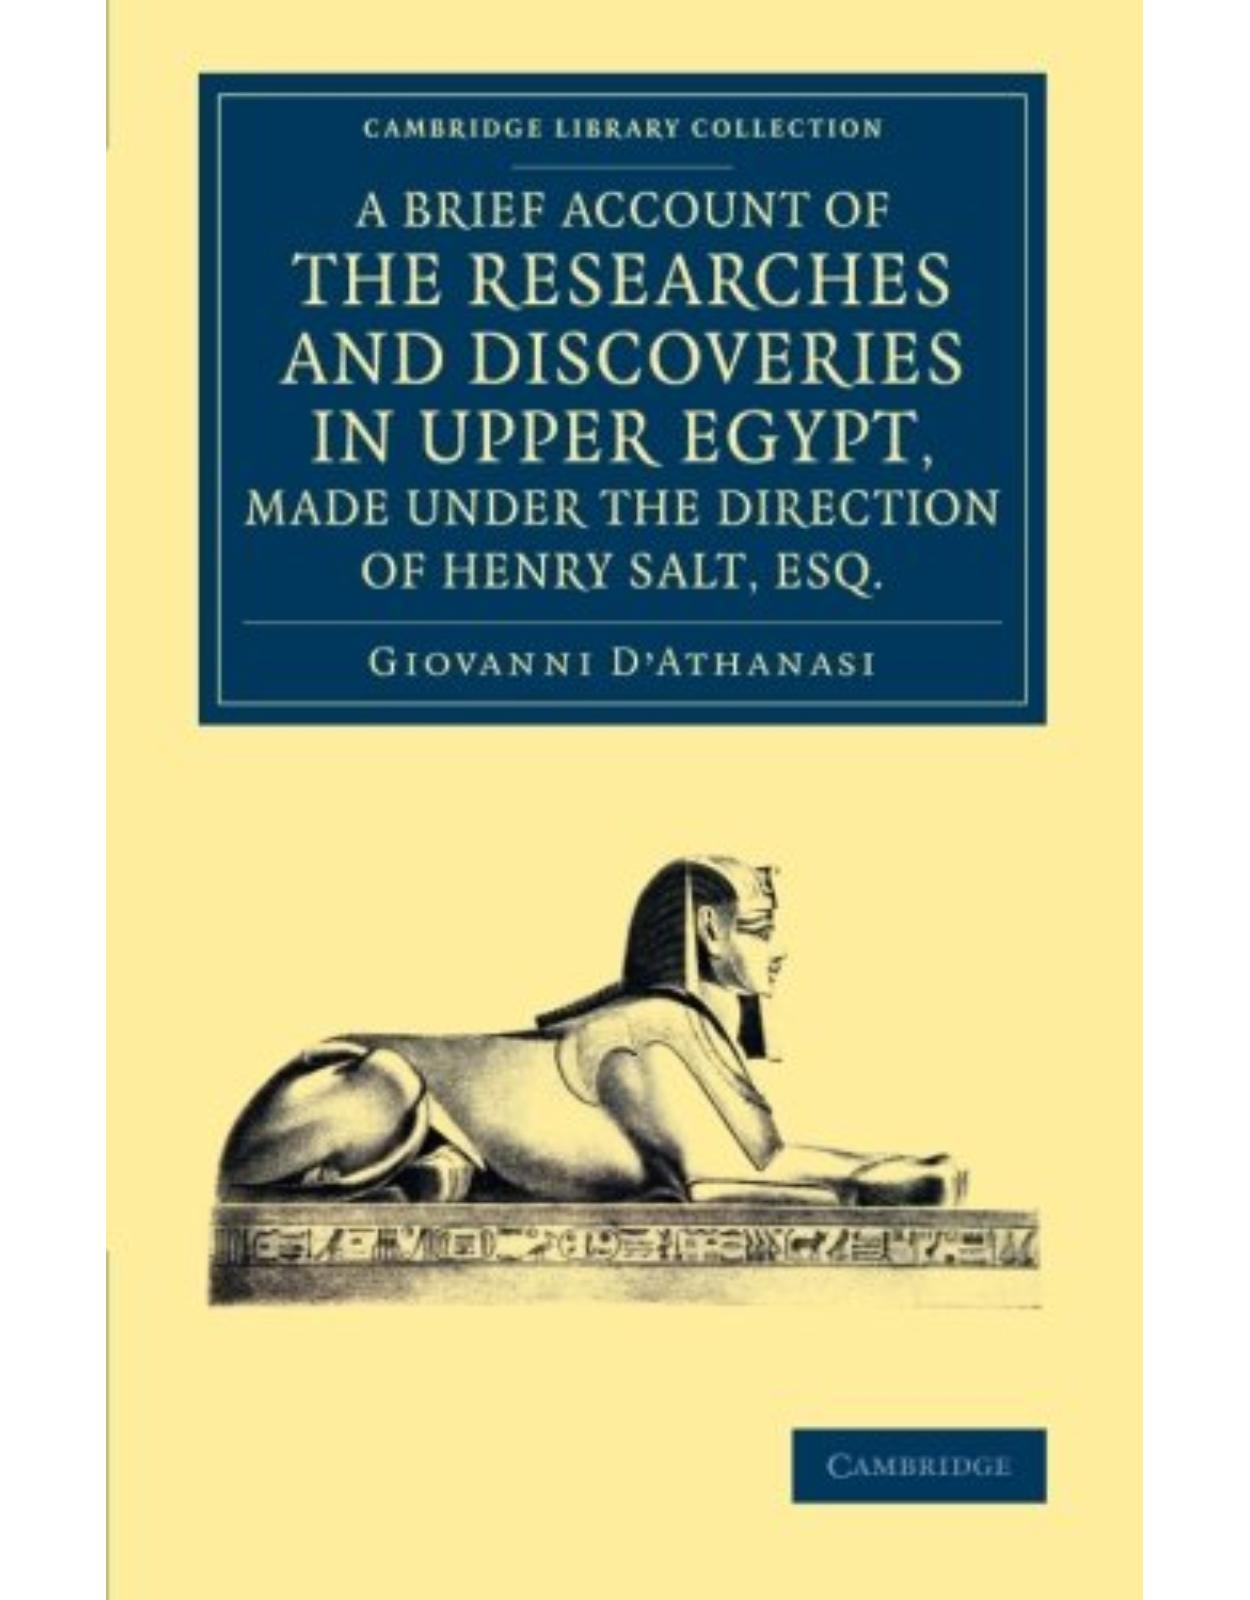 A Brief Account of the Researches and Discoveries in Upper Egypt, Made under the Direction of Henry Salt, Esq.: To Which is Added a Detailed Catalogue ... (Cambridge Library Collection - Egyptology)